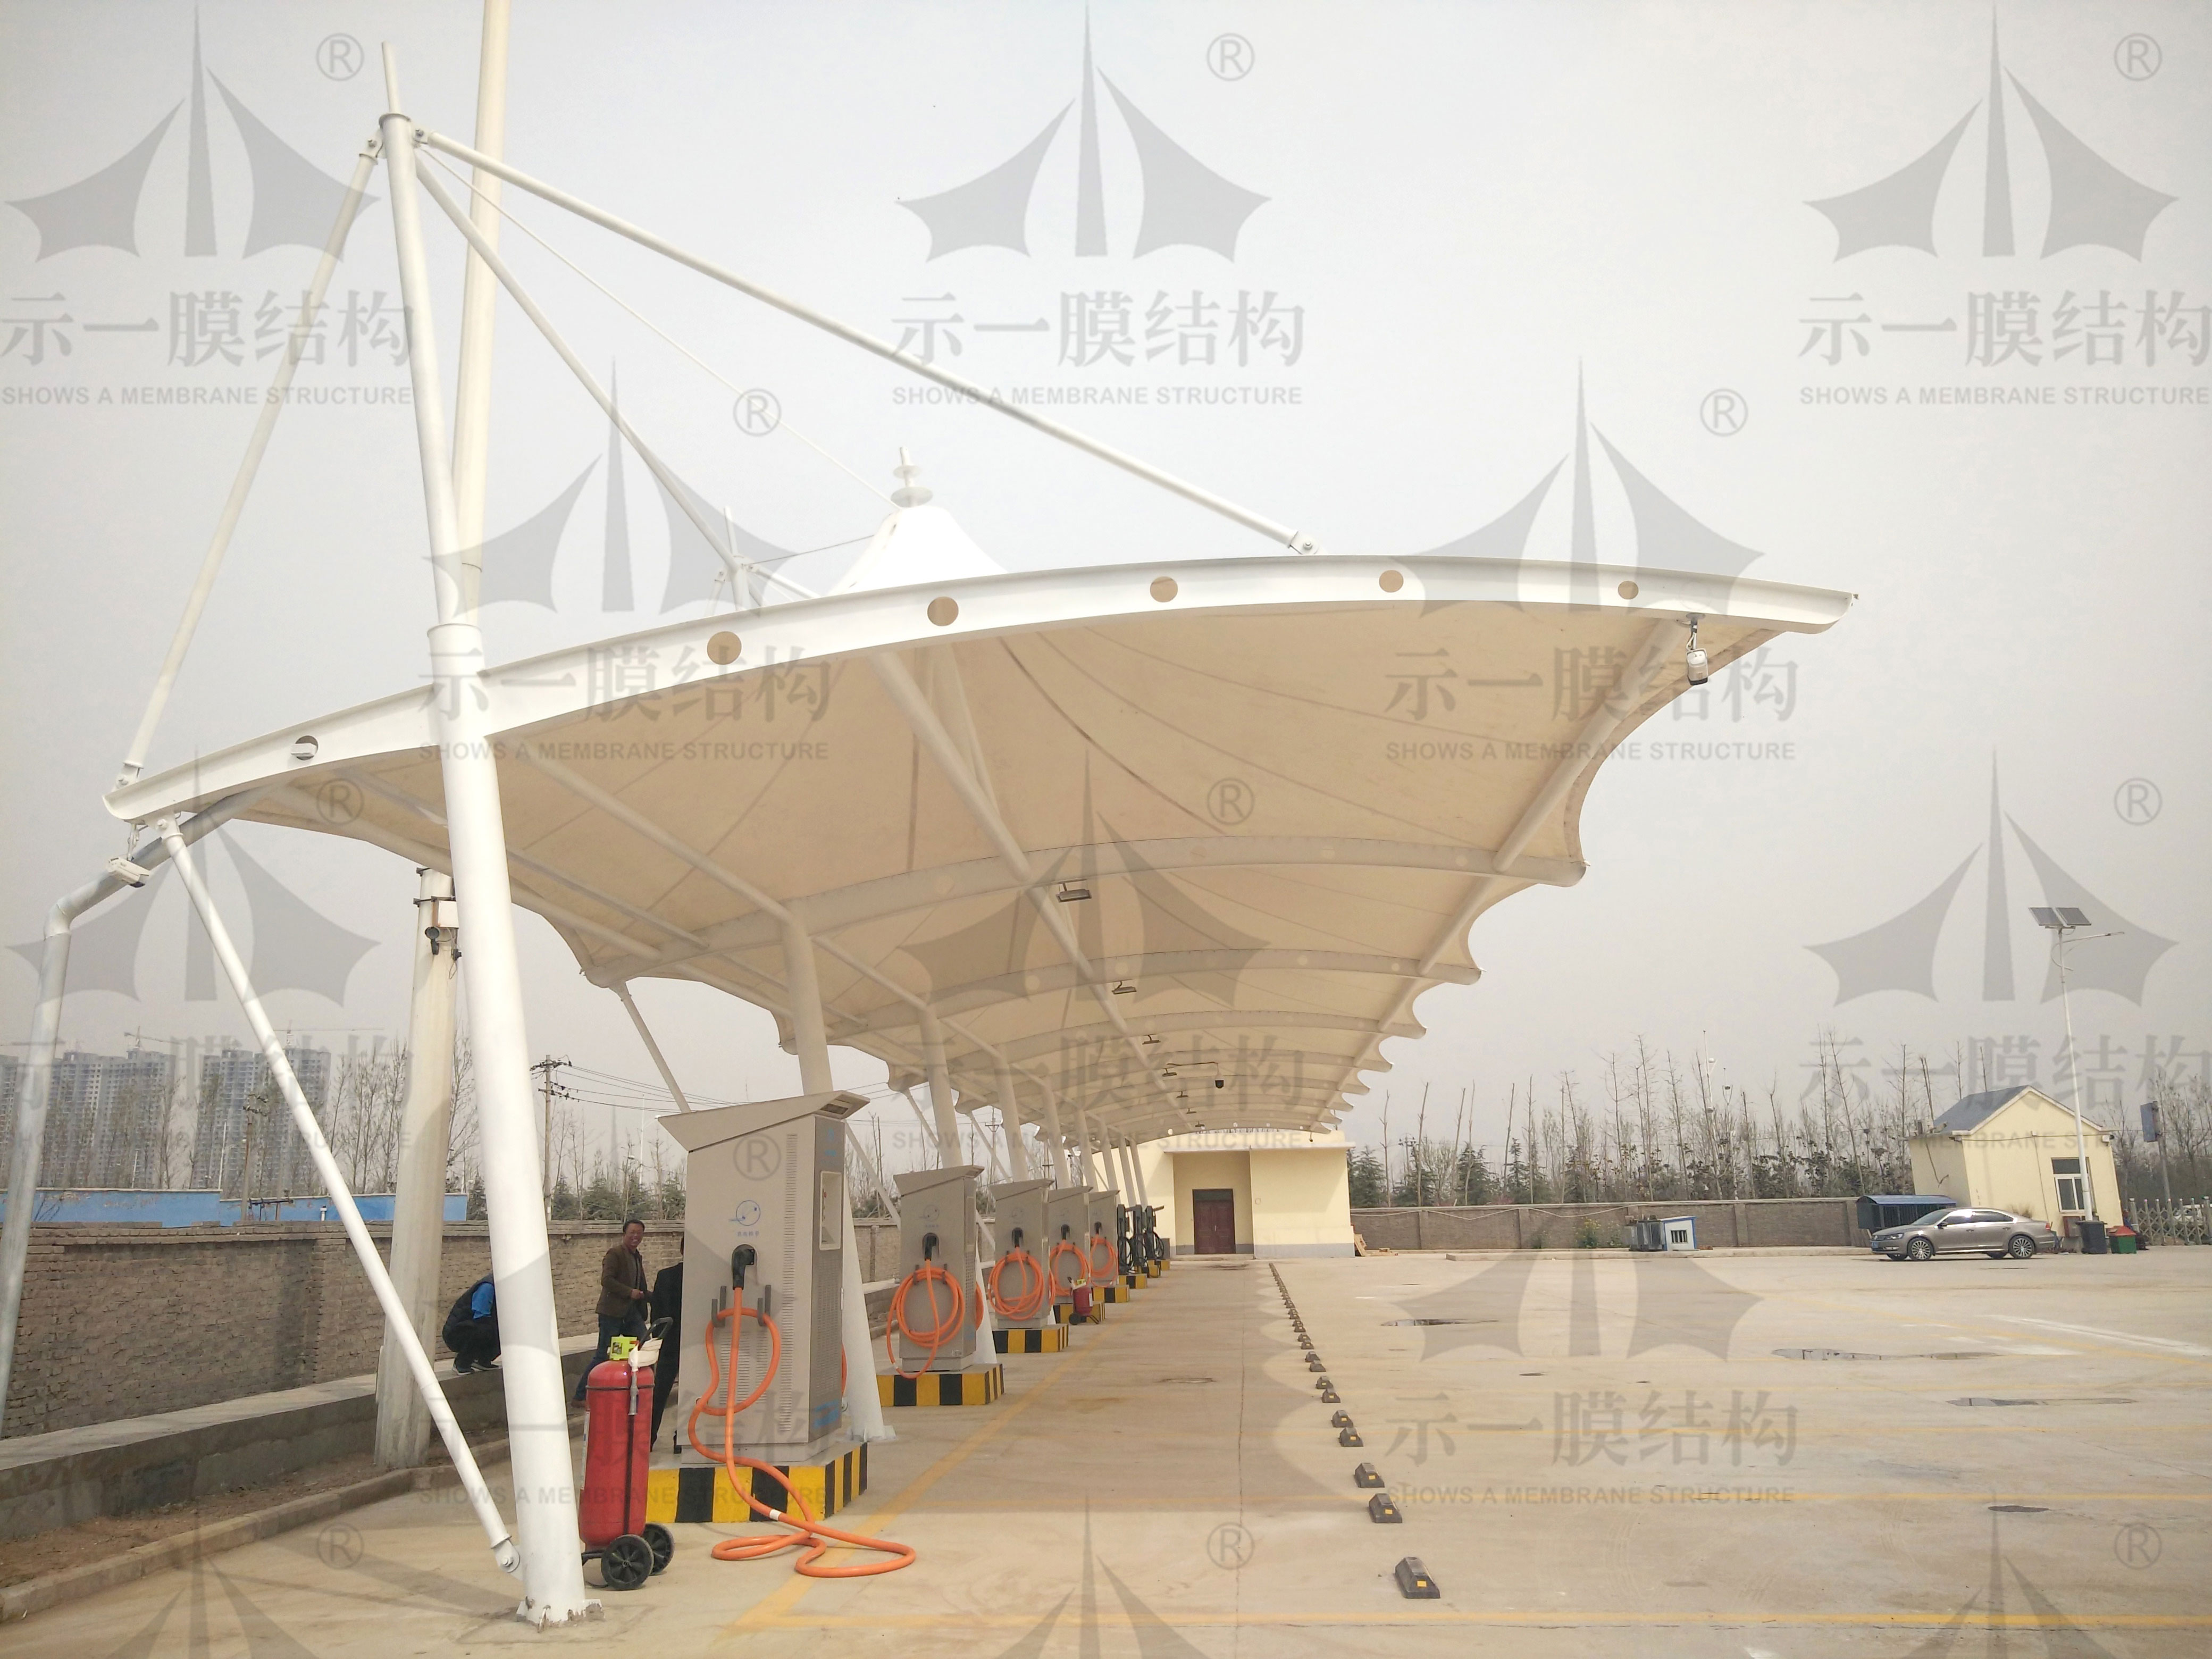 Show you what are the quality inspection work of membrane structure parking shed